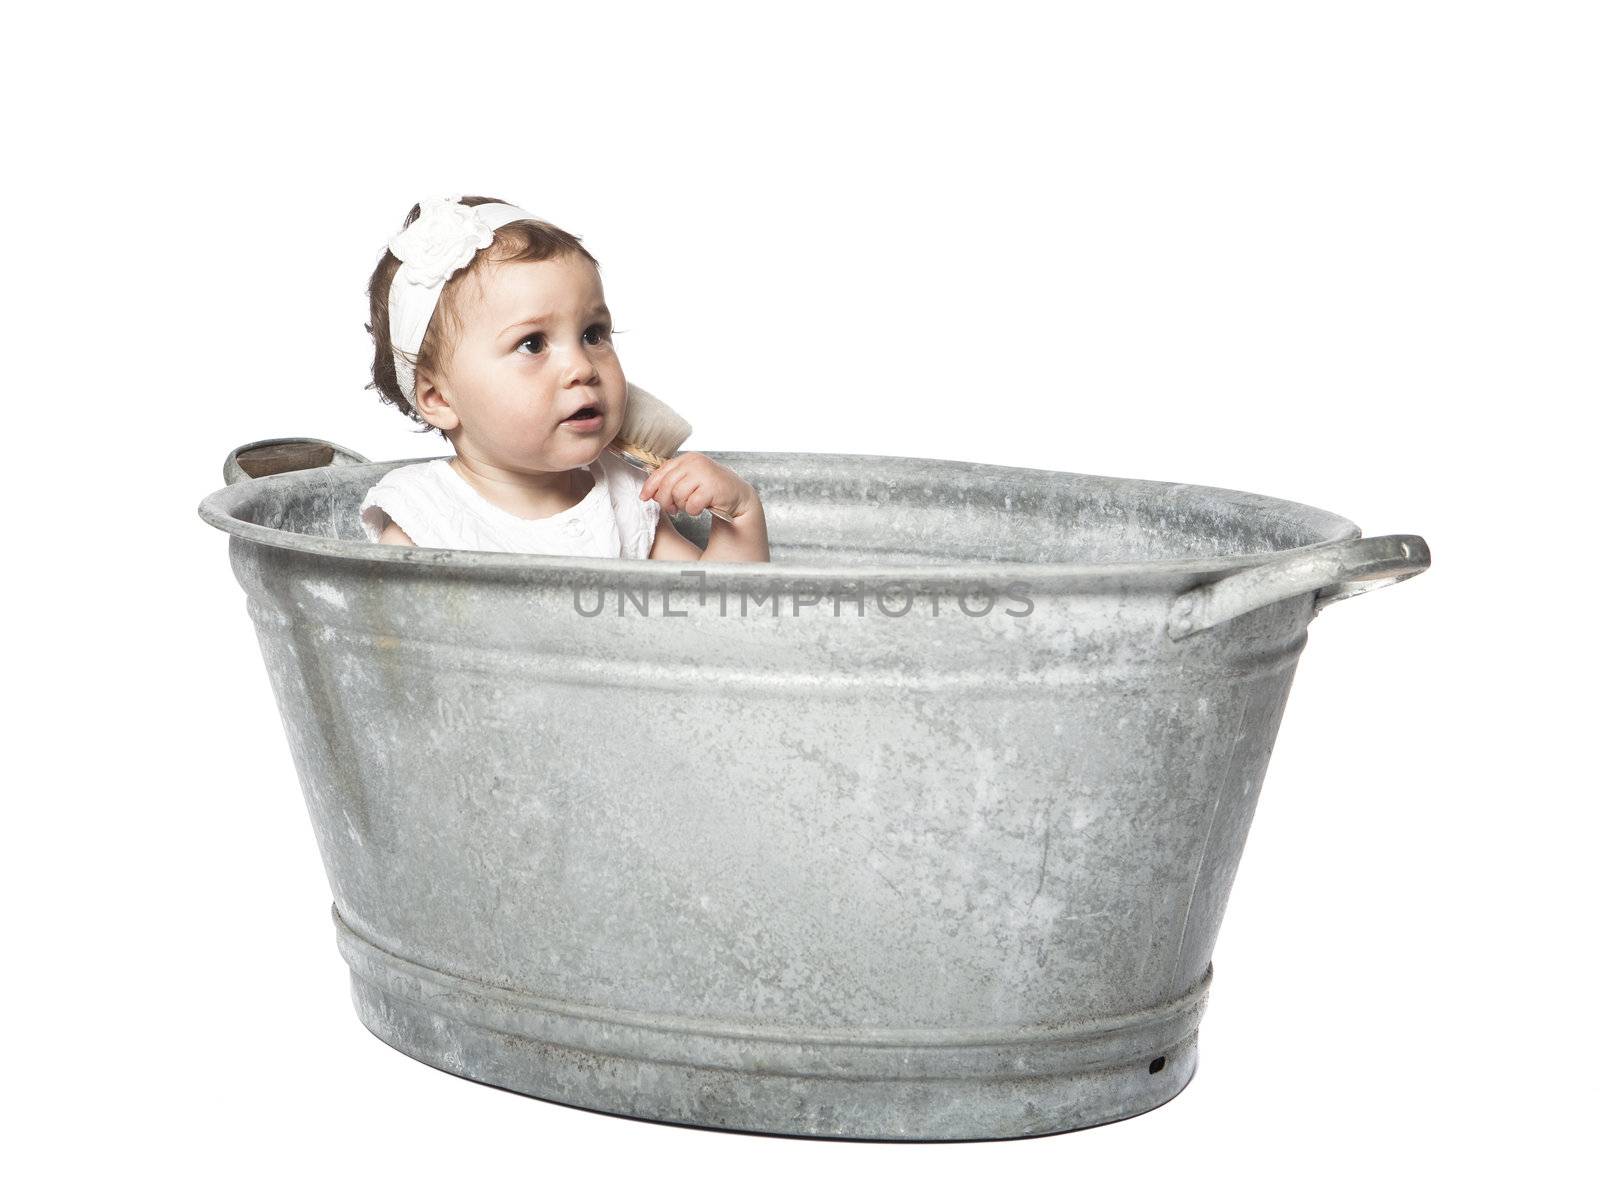 Baby in a bucket isolated on white